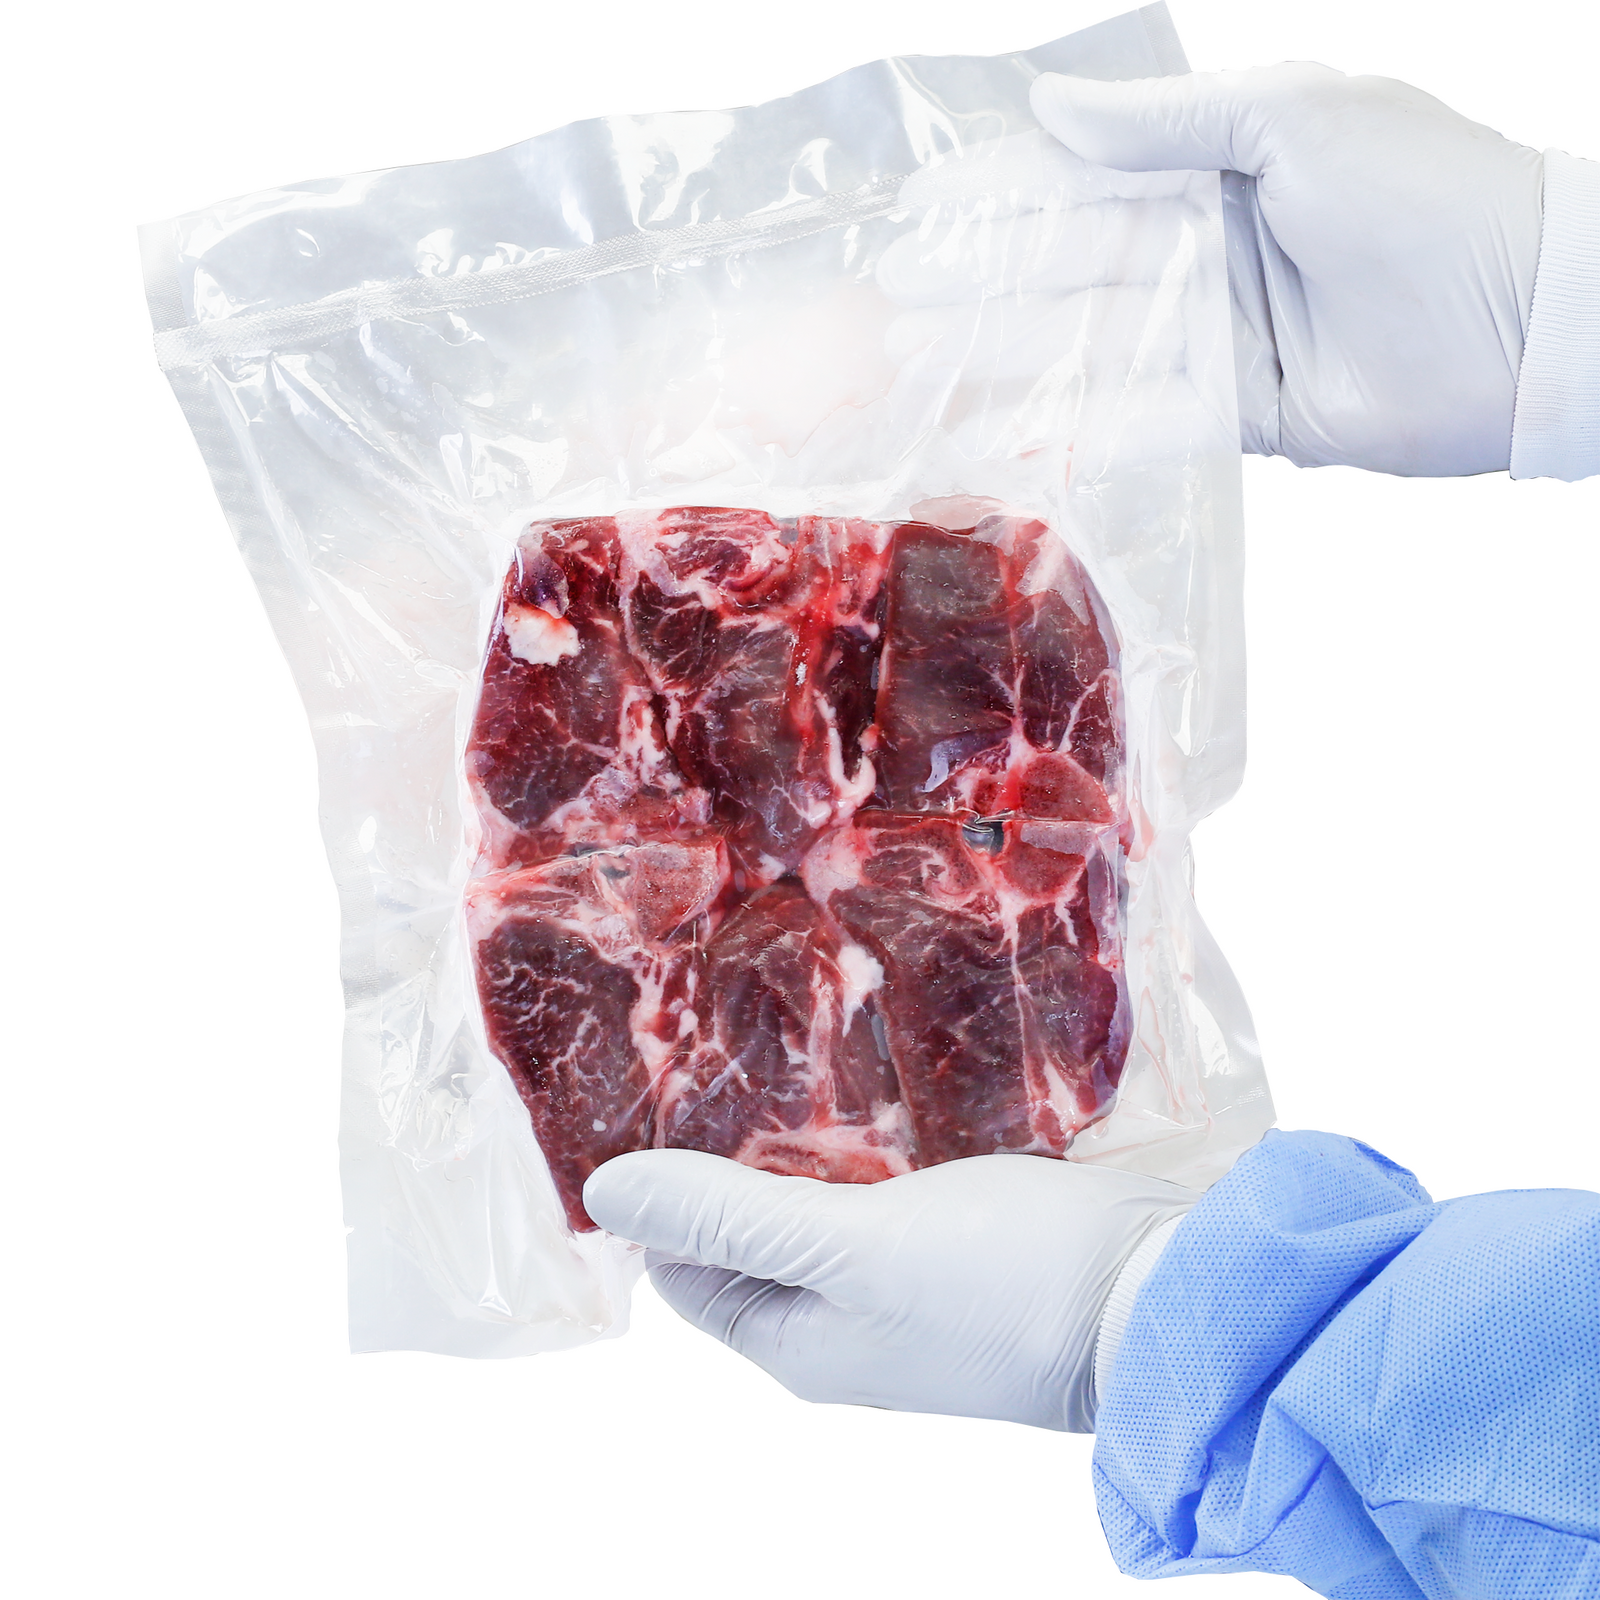 A freshly packaged vacuum bag containing red meat inside. A man wearing latex gloves is holding the package up to the camera. 